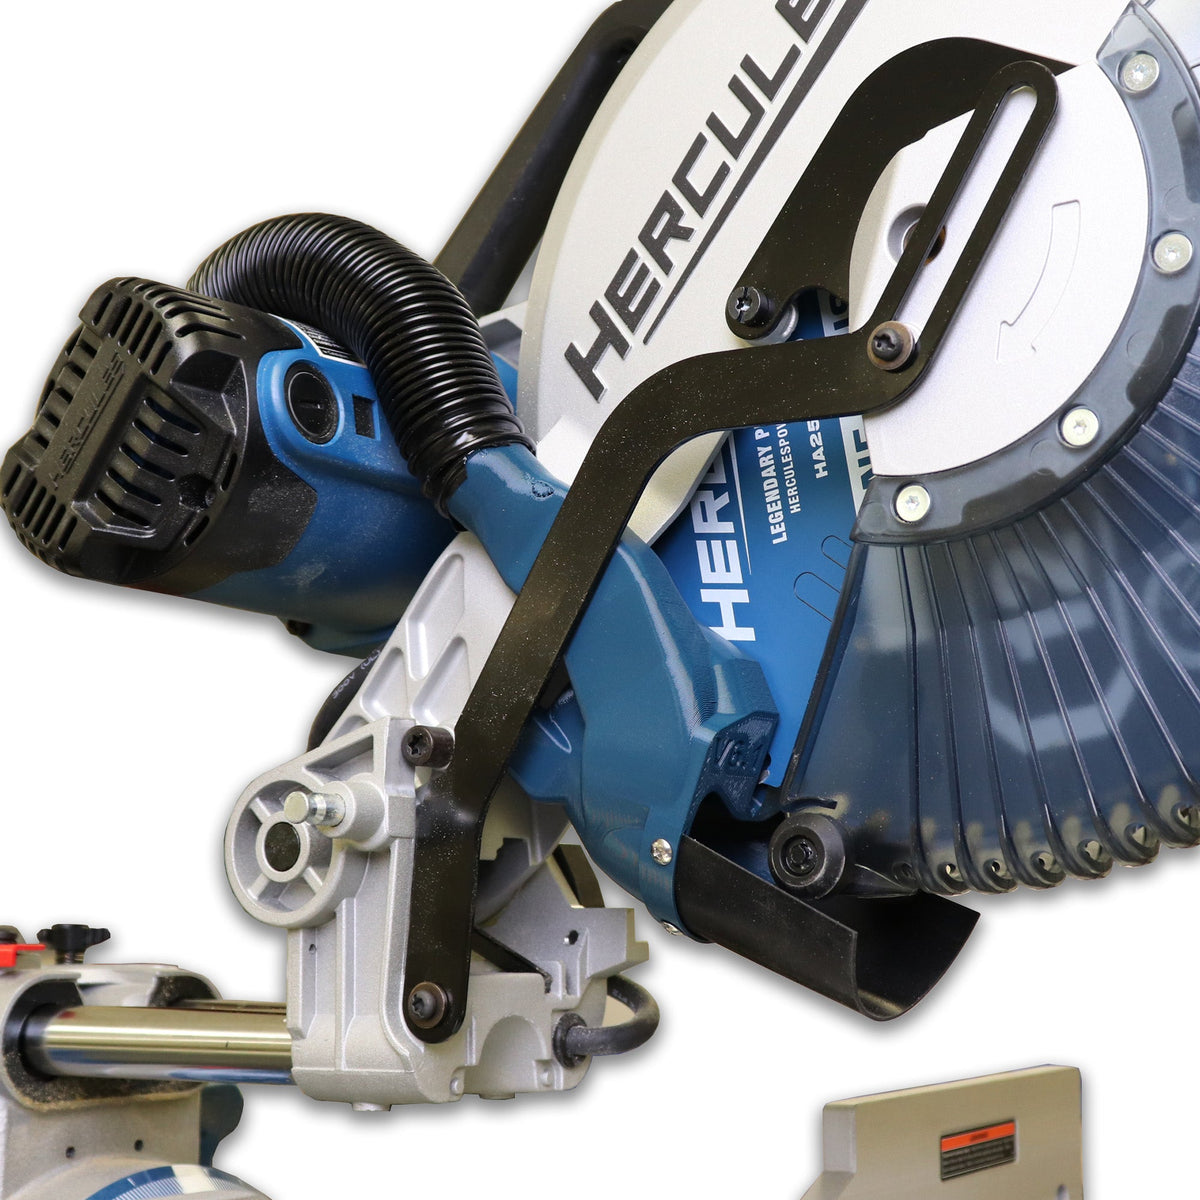 Hercules 12" Sliding Compound Miter Saw Dust Collection - Shop Nation Store